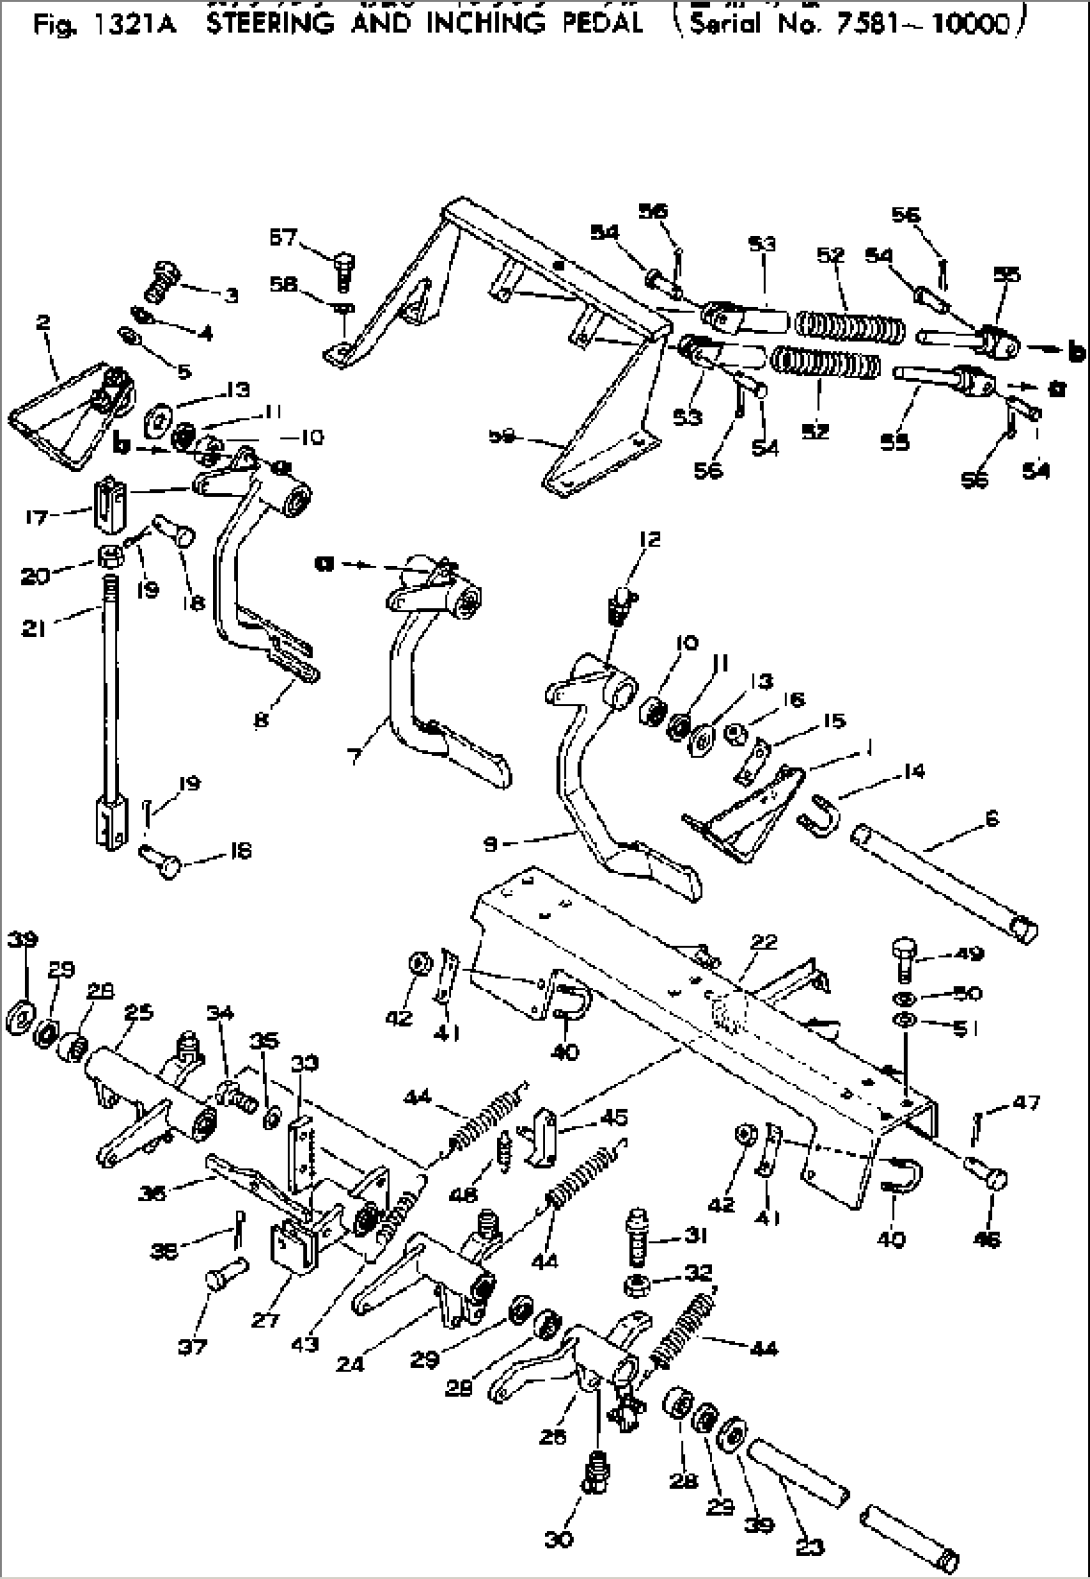 STEERING AND INCHING PEDAL(#7581-10000)